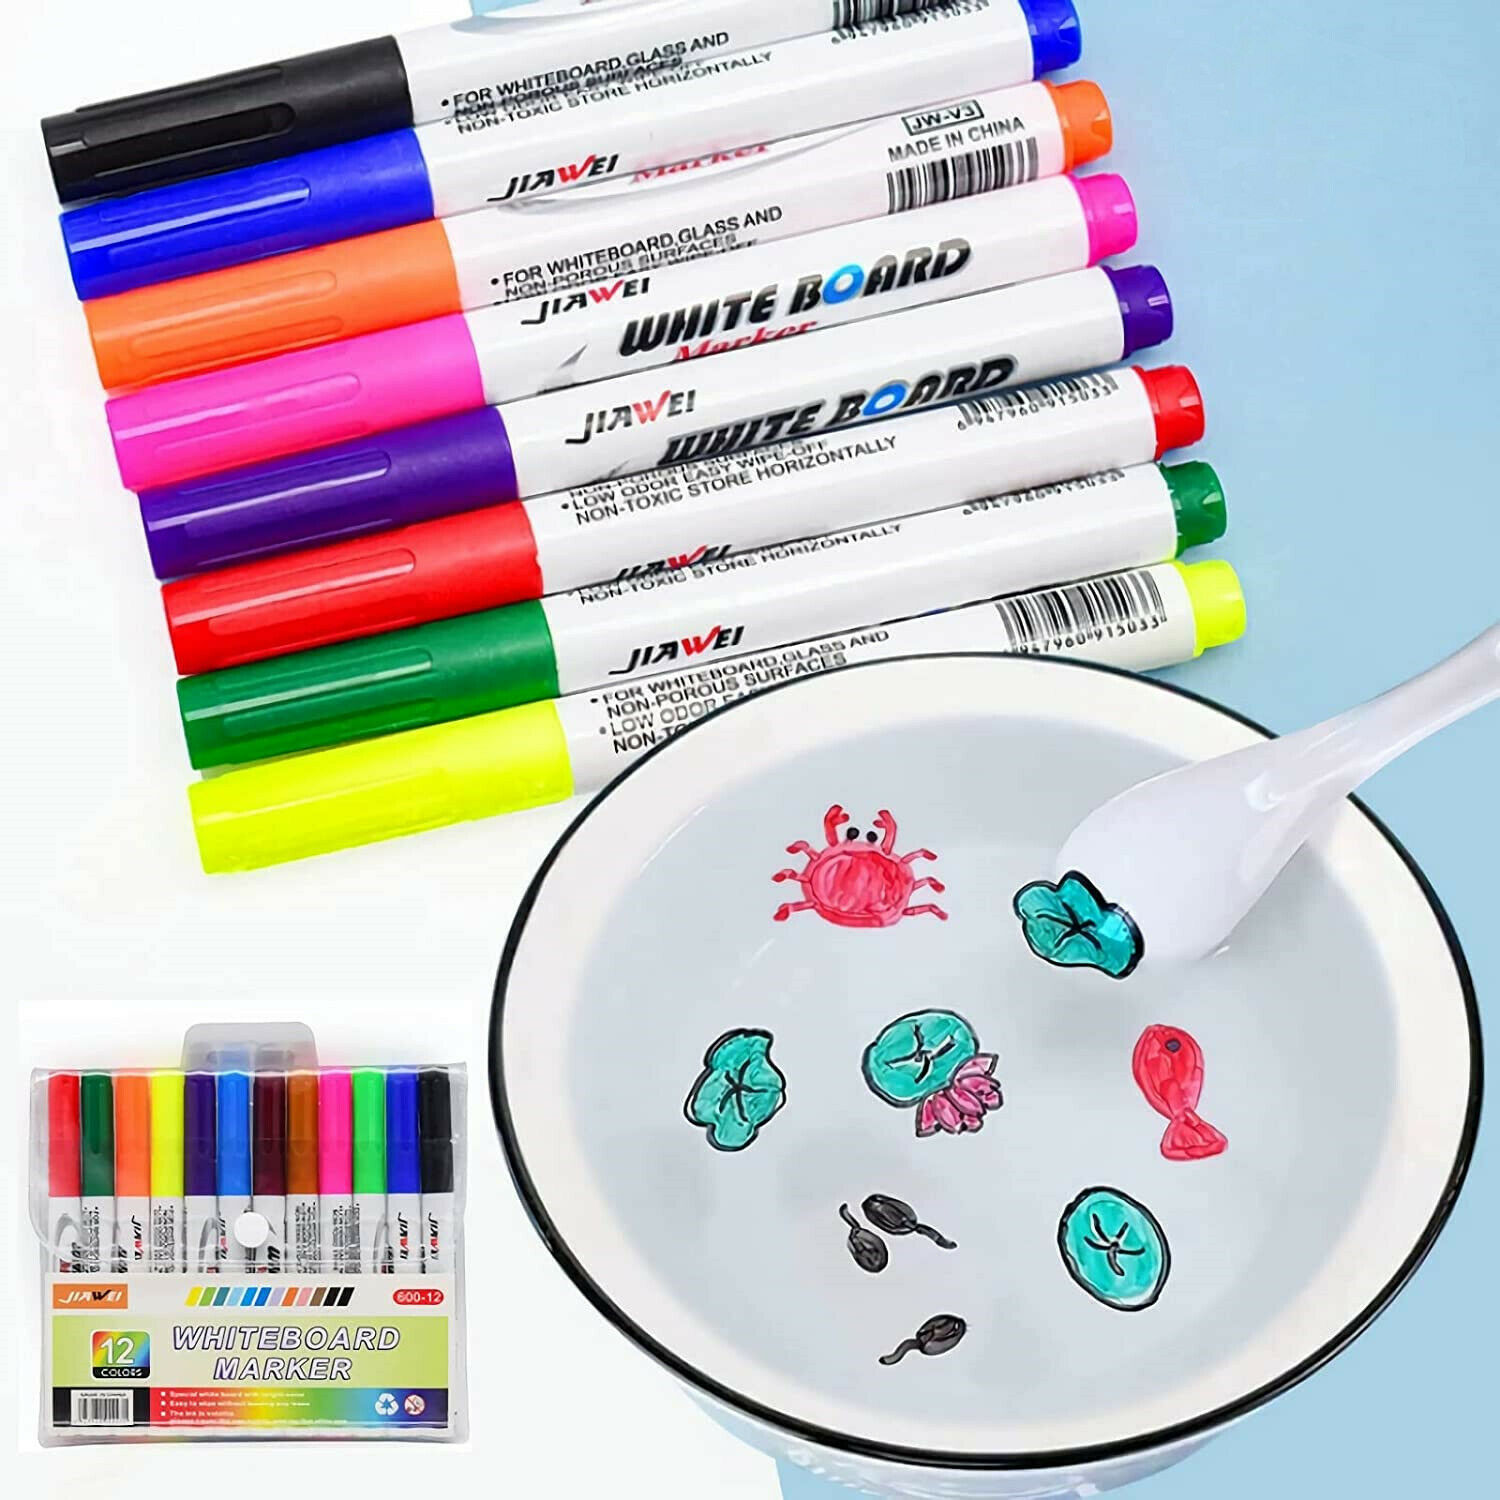 Magical Water Painting Pen, Magic Doodle Drawing Pens, Doodle Water  Floating Painting Marker Pens for Kids Adult Drawing Gift 